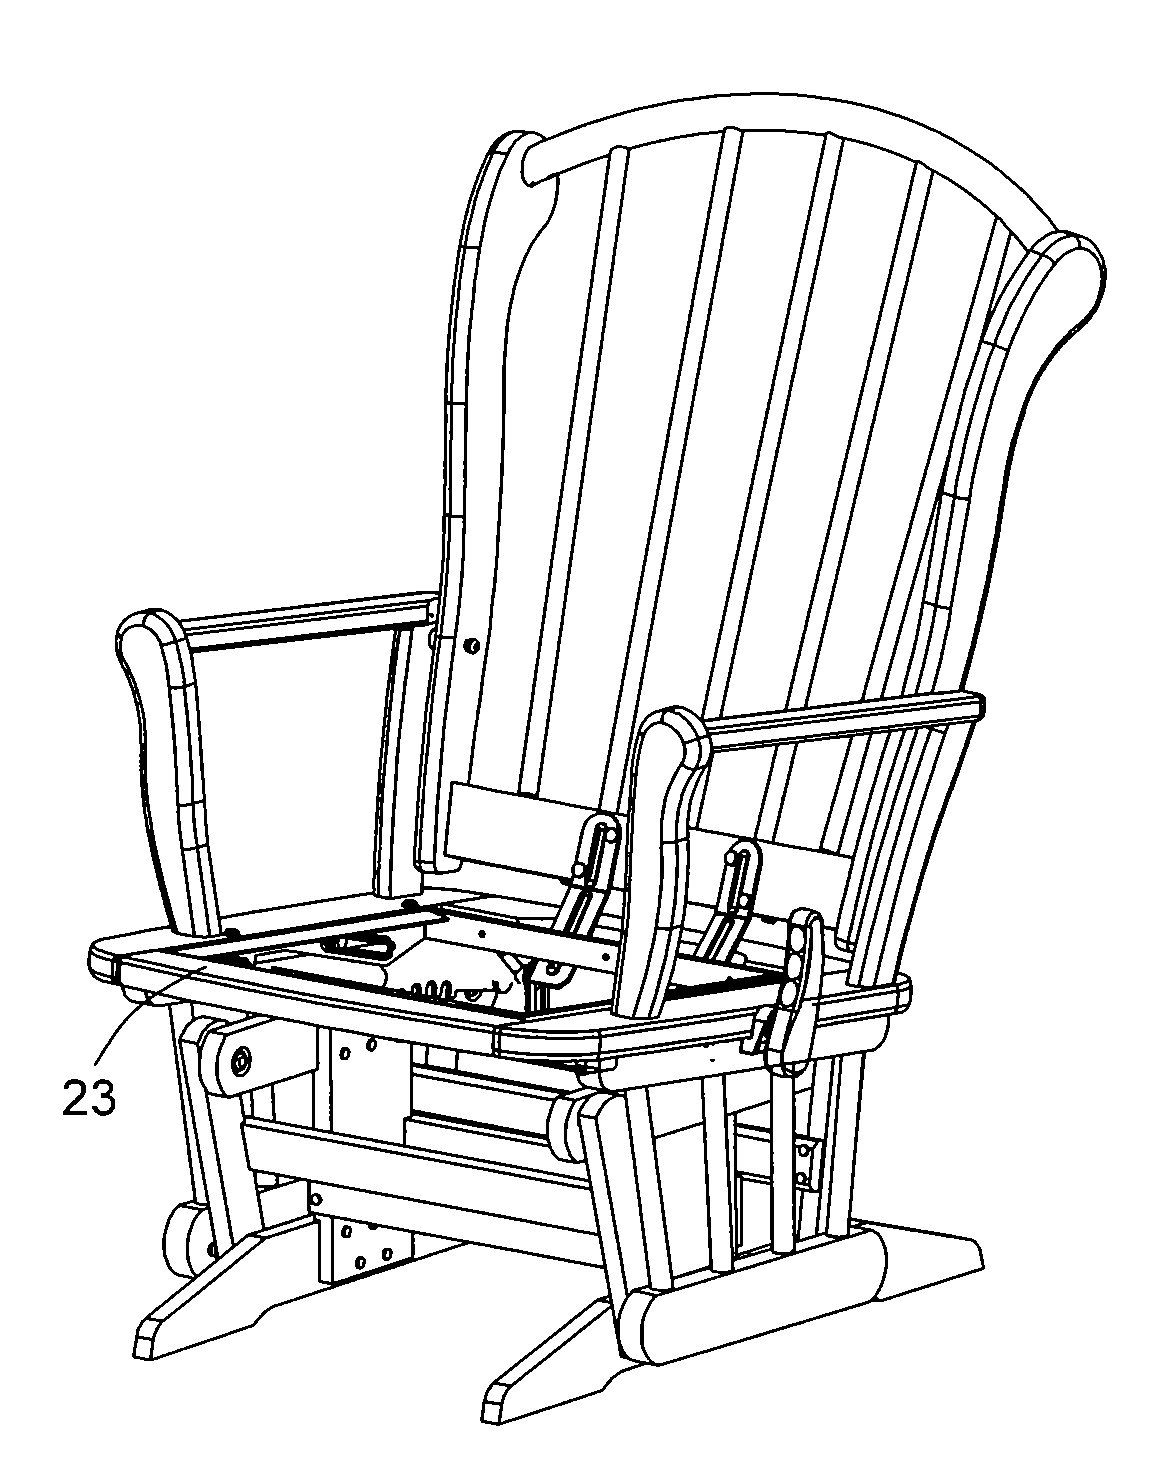 Spiral jaw locking mechanism for adjustment system in chairs